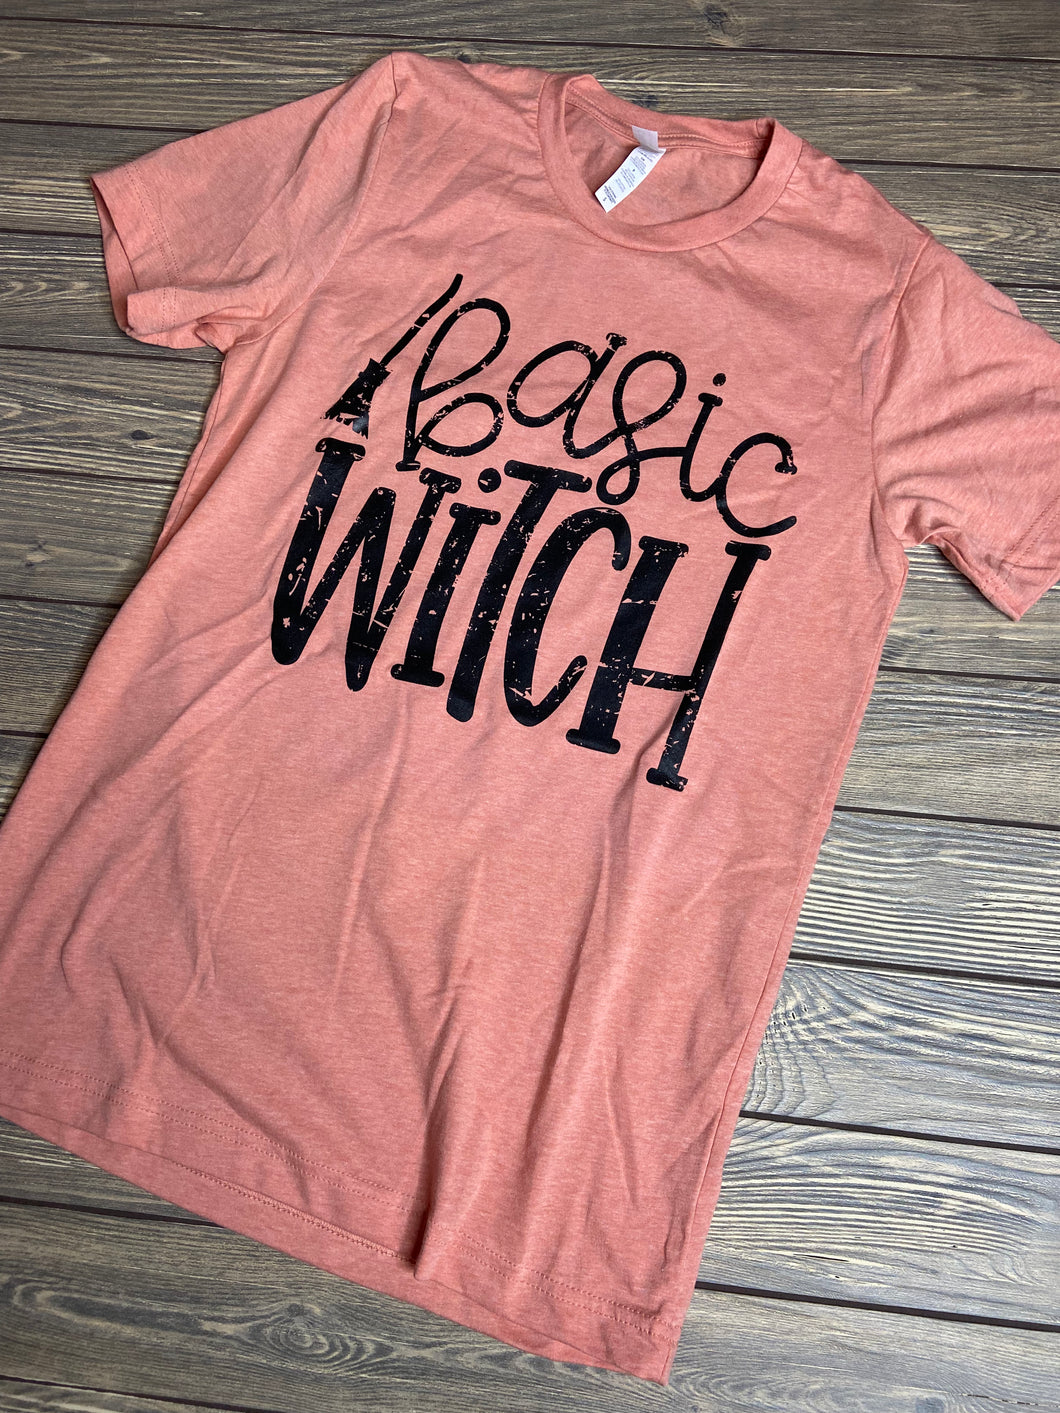 Basic Witch Tee